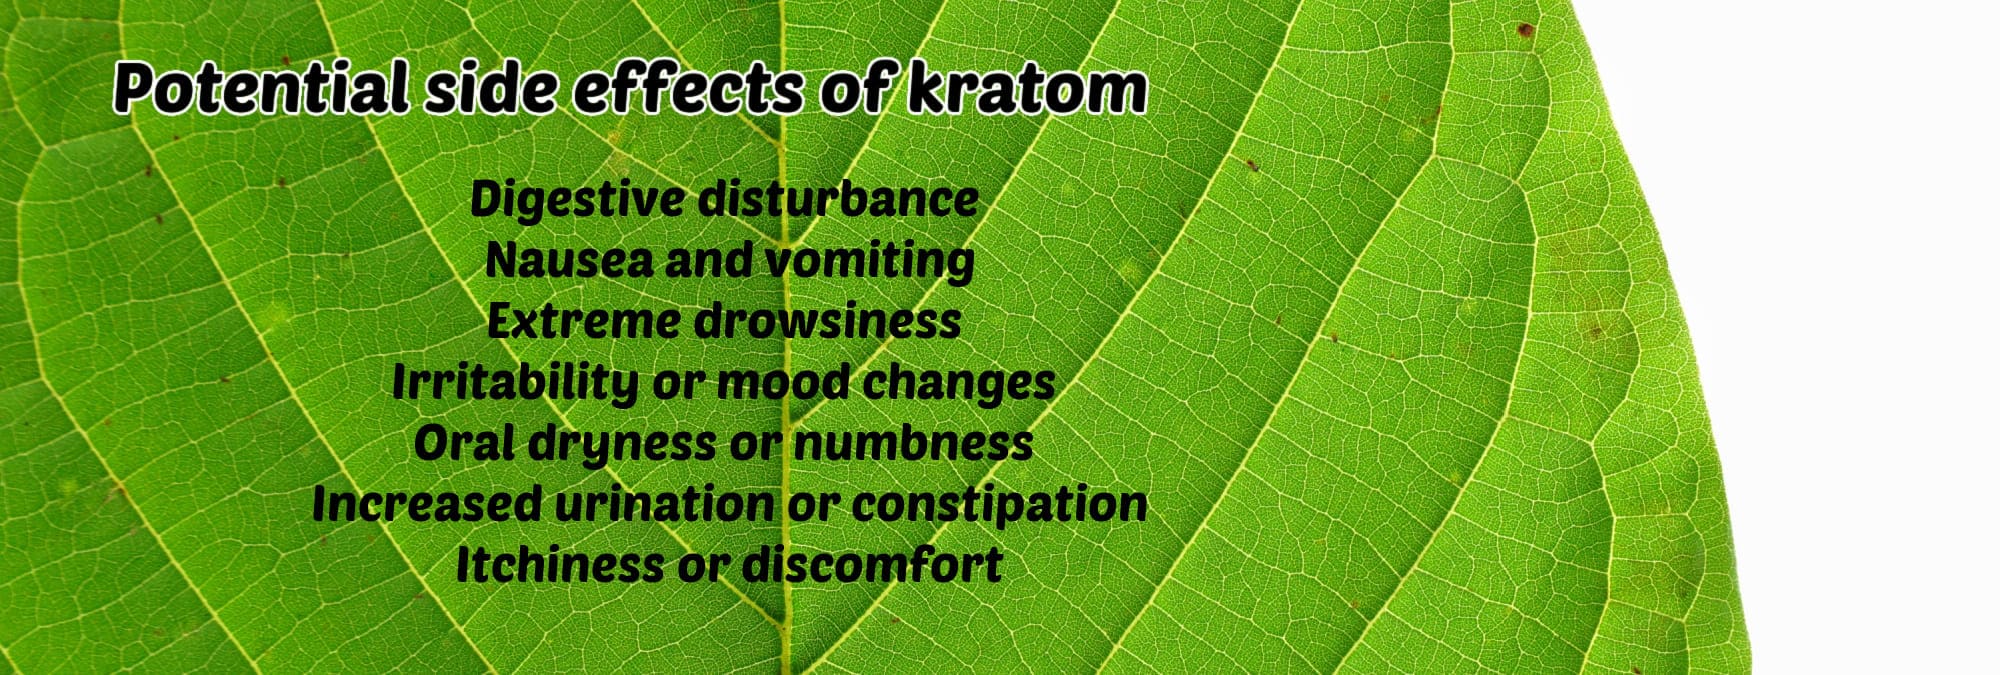 image of potential side effects of kratom